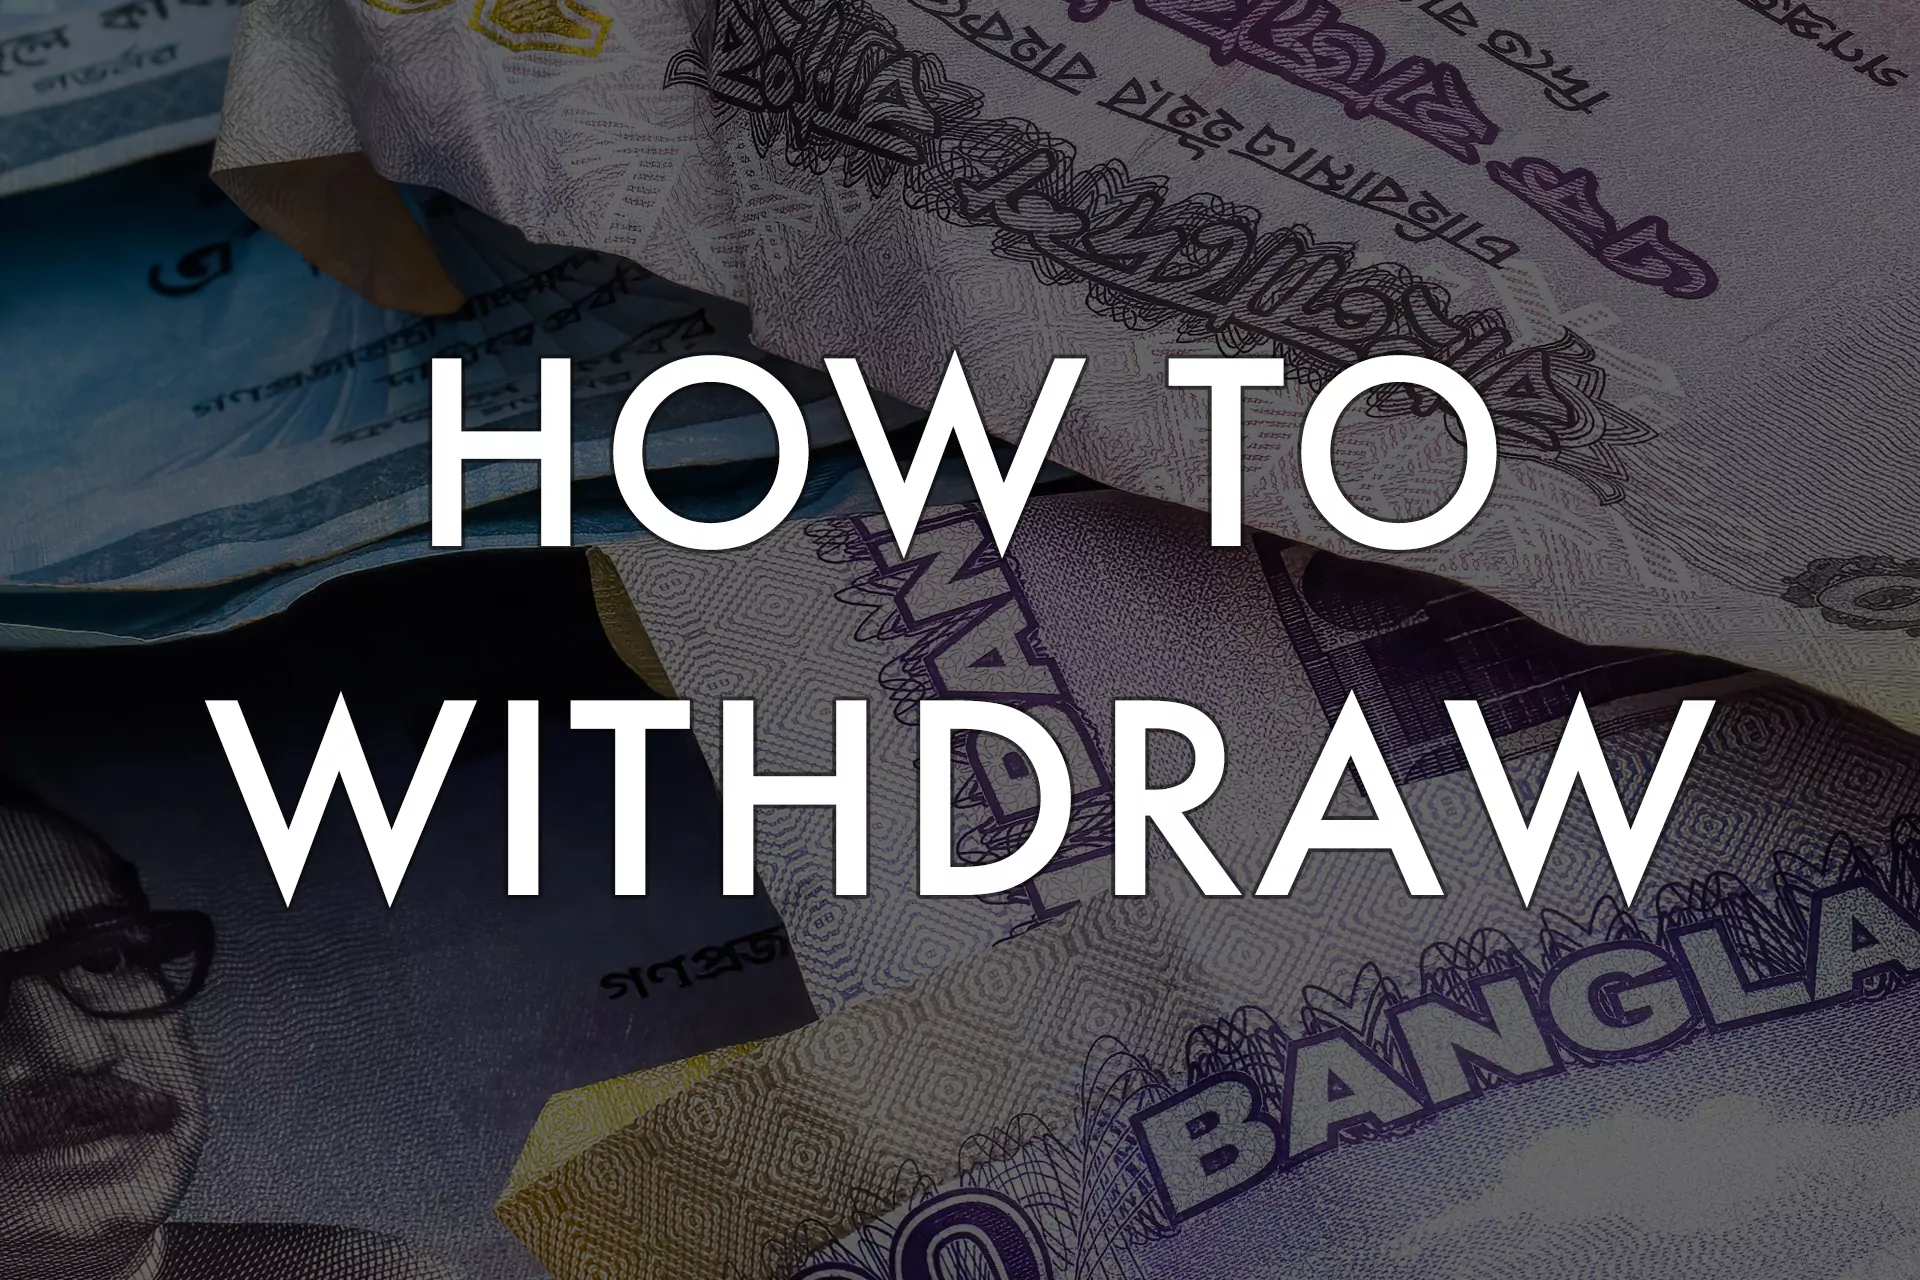 Usually, bettors withdraw money to the same bank card or e-wallet that they used for topping up an account.